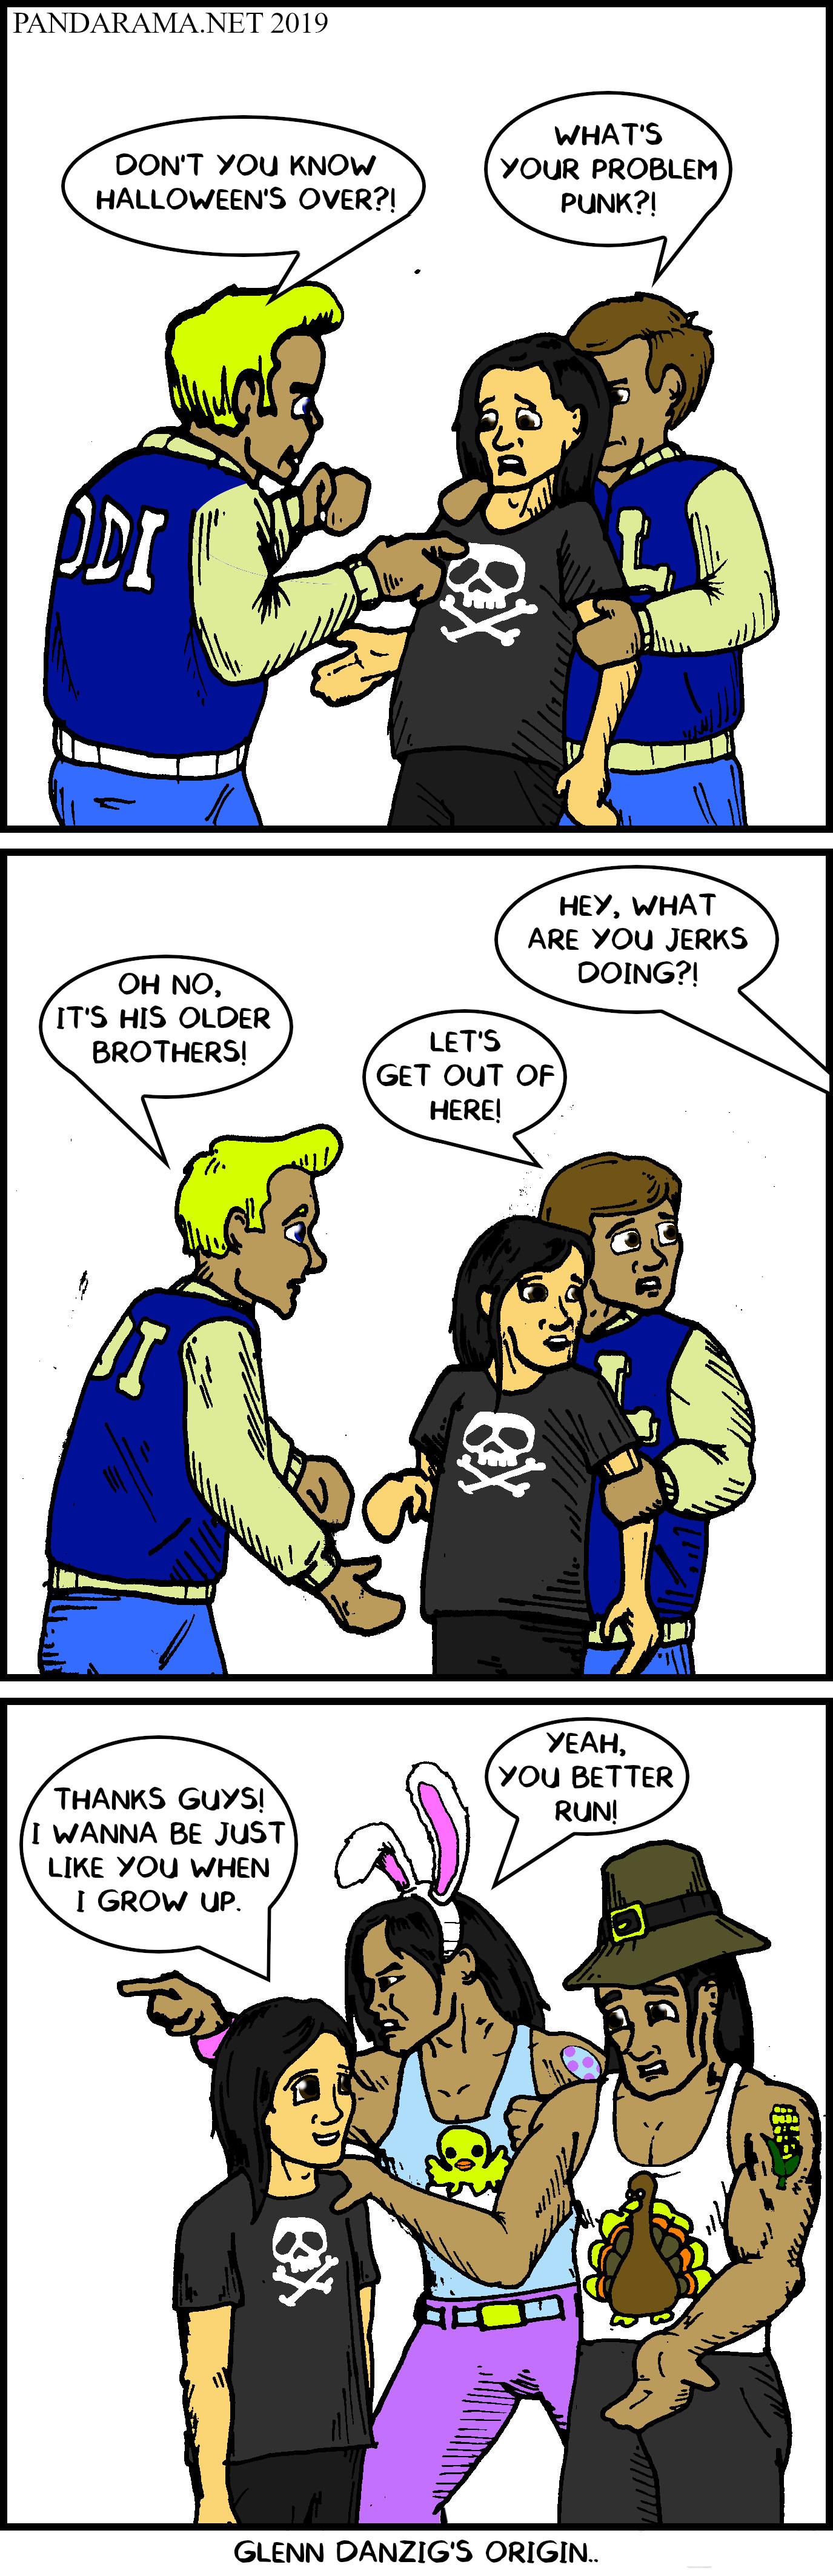 cartoon. webcomic. young Glenn Danzig rescued from bullies by Thanksgiving and Easter-themed older brothers. 